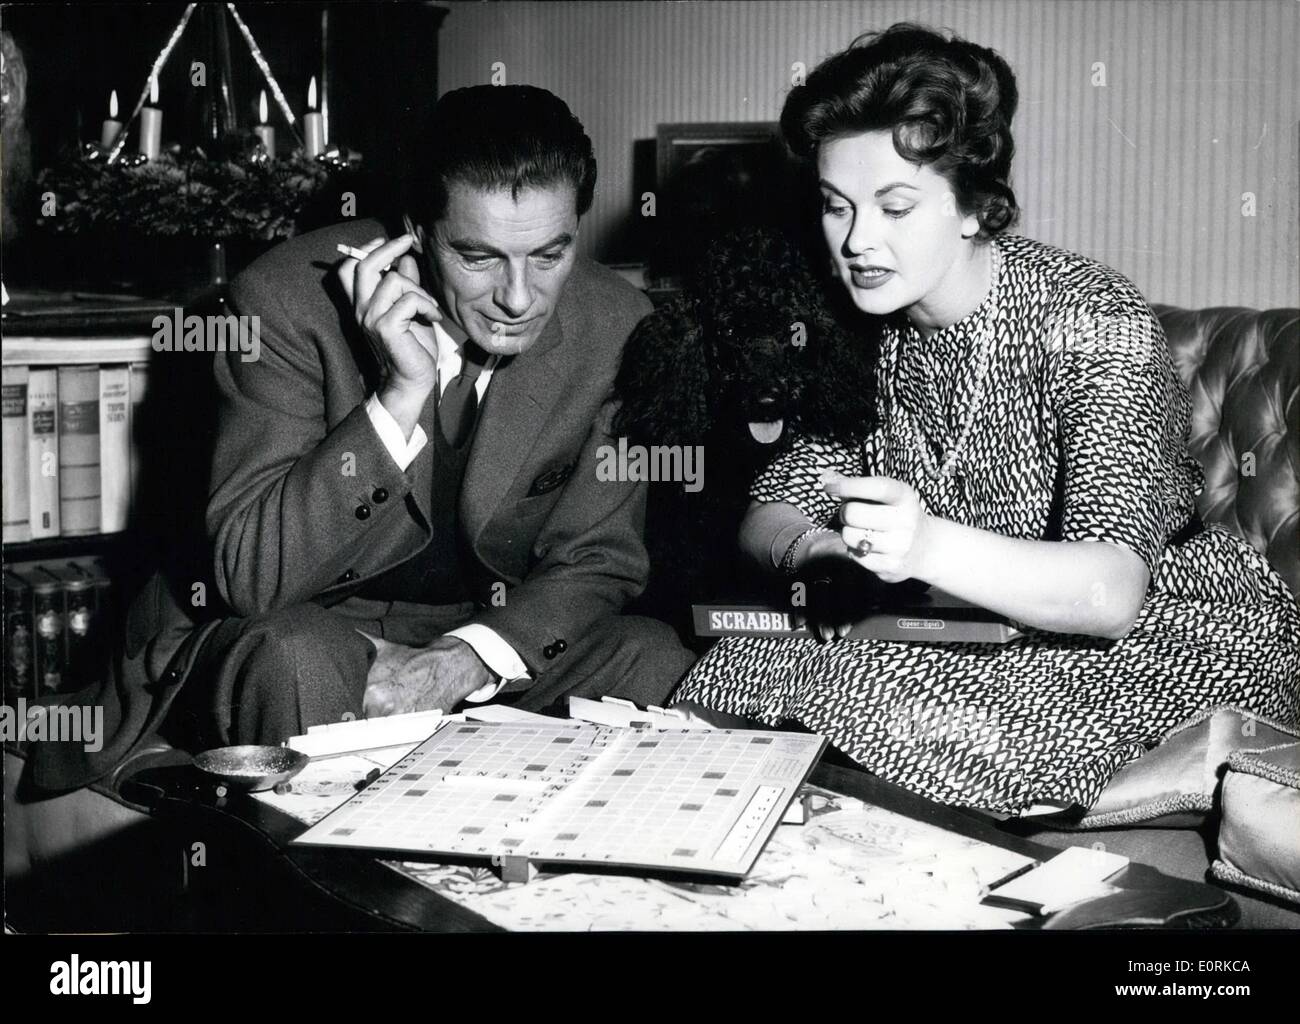 Dec. 12, 1959 - Best-seller from USA on the Christmas-market The new game ''Scrabble'' which is already a best-seller in the USA is becoming a new hobby for spare time in Germany for all the family. The game consists of a board with 225 fields and of a hundred game-stones. Every stone has one letter of the alphabet printed on one side. You have to put the stones on the table so that you can see the letters clearly. Then each player takes seven stones like a crossword-puzzle you lay a trellis of words. Each letter has now a certain amount of points Stock Photo